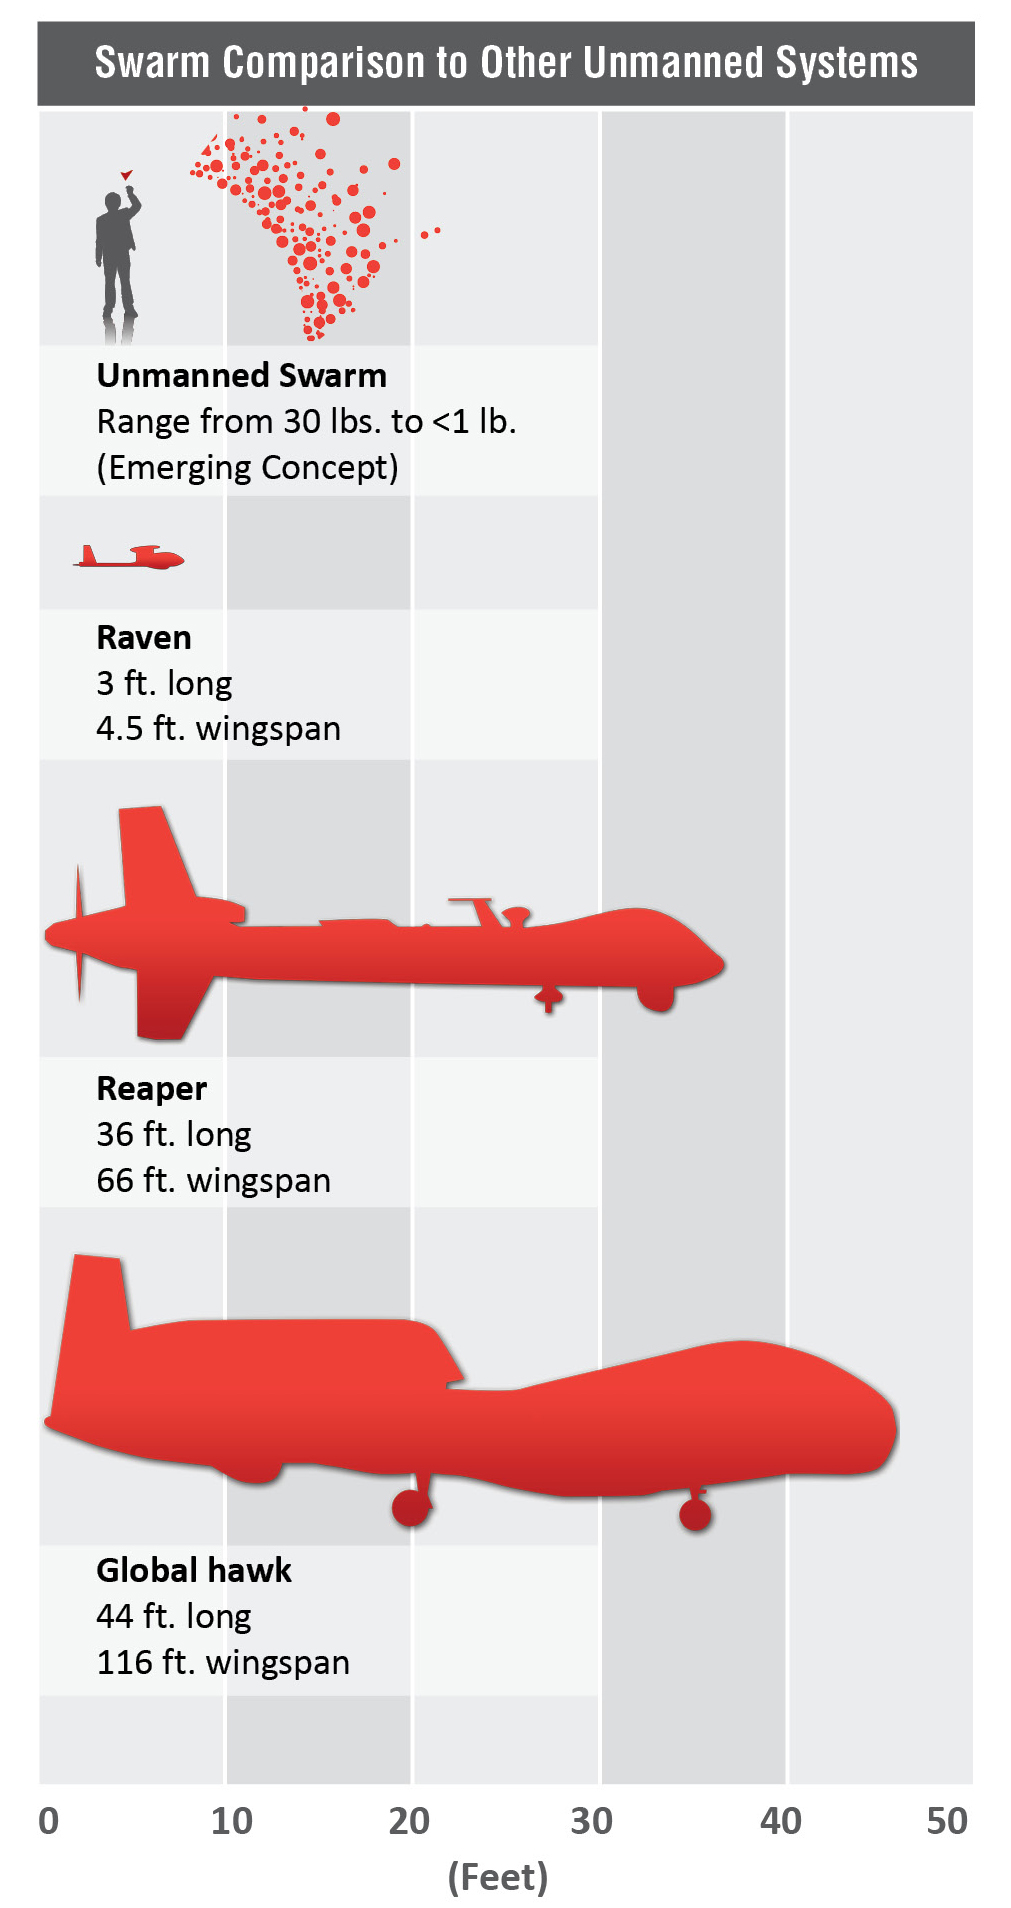 Swarm Comparison to Other Unmanned Systems